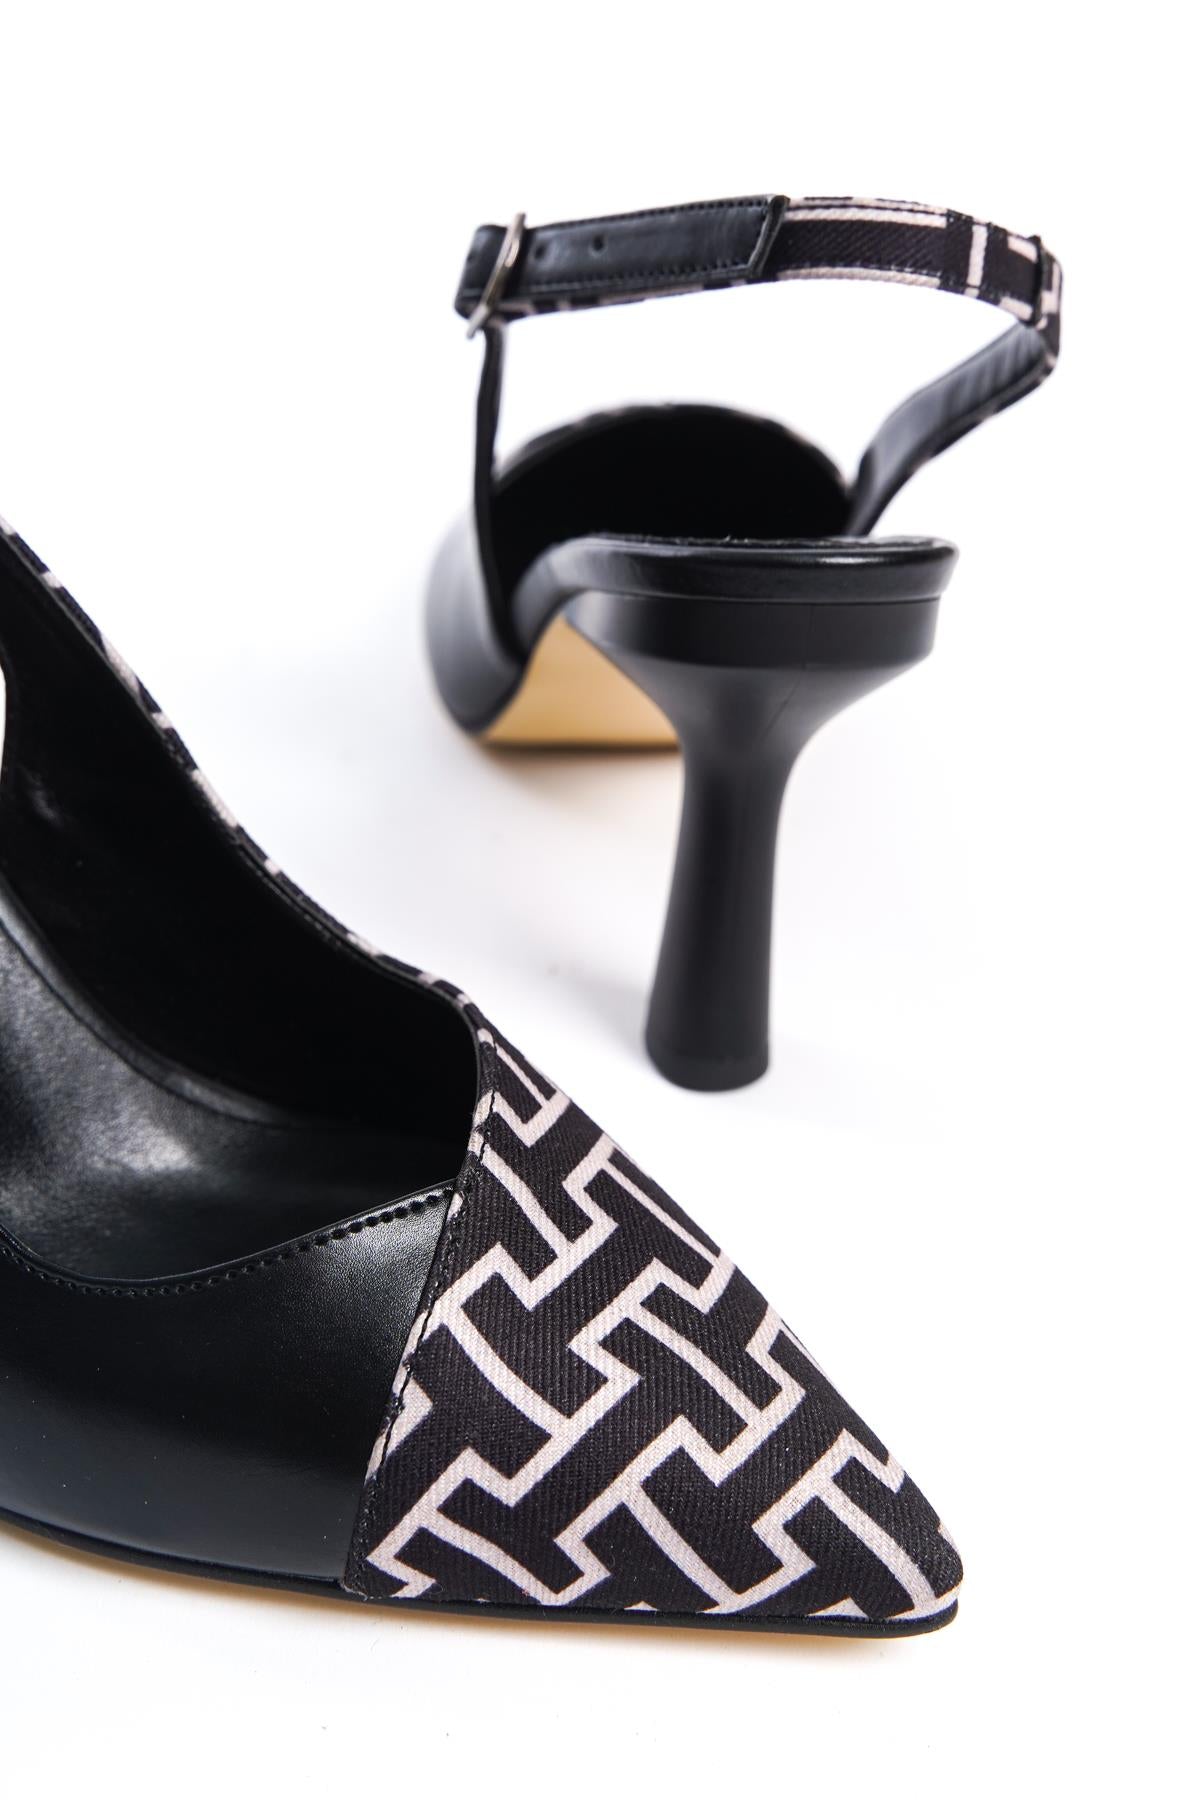 Women's Black Leather Fabric Detailed Heeled Shoes - STREETMODE™